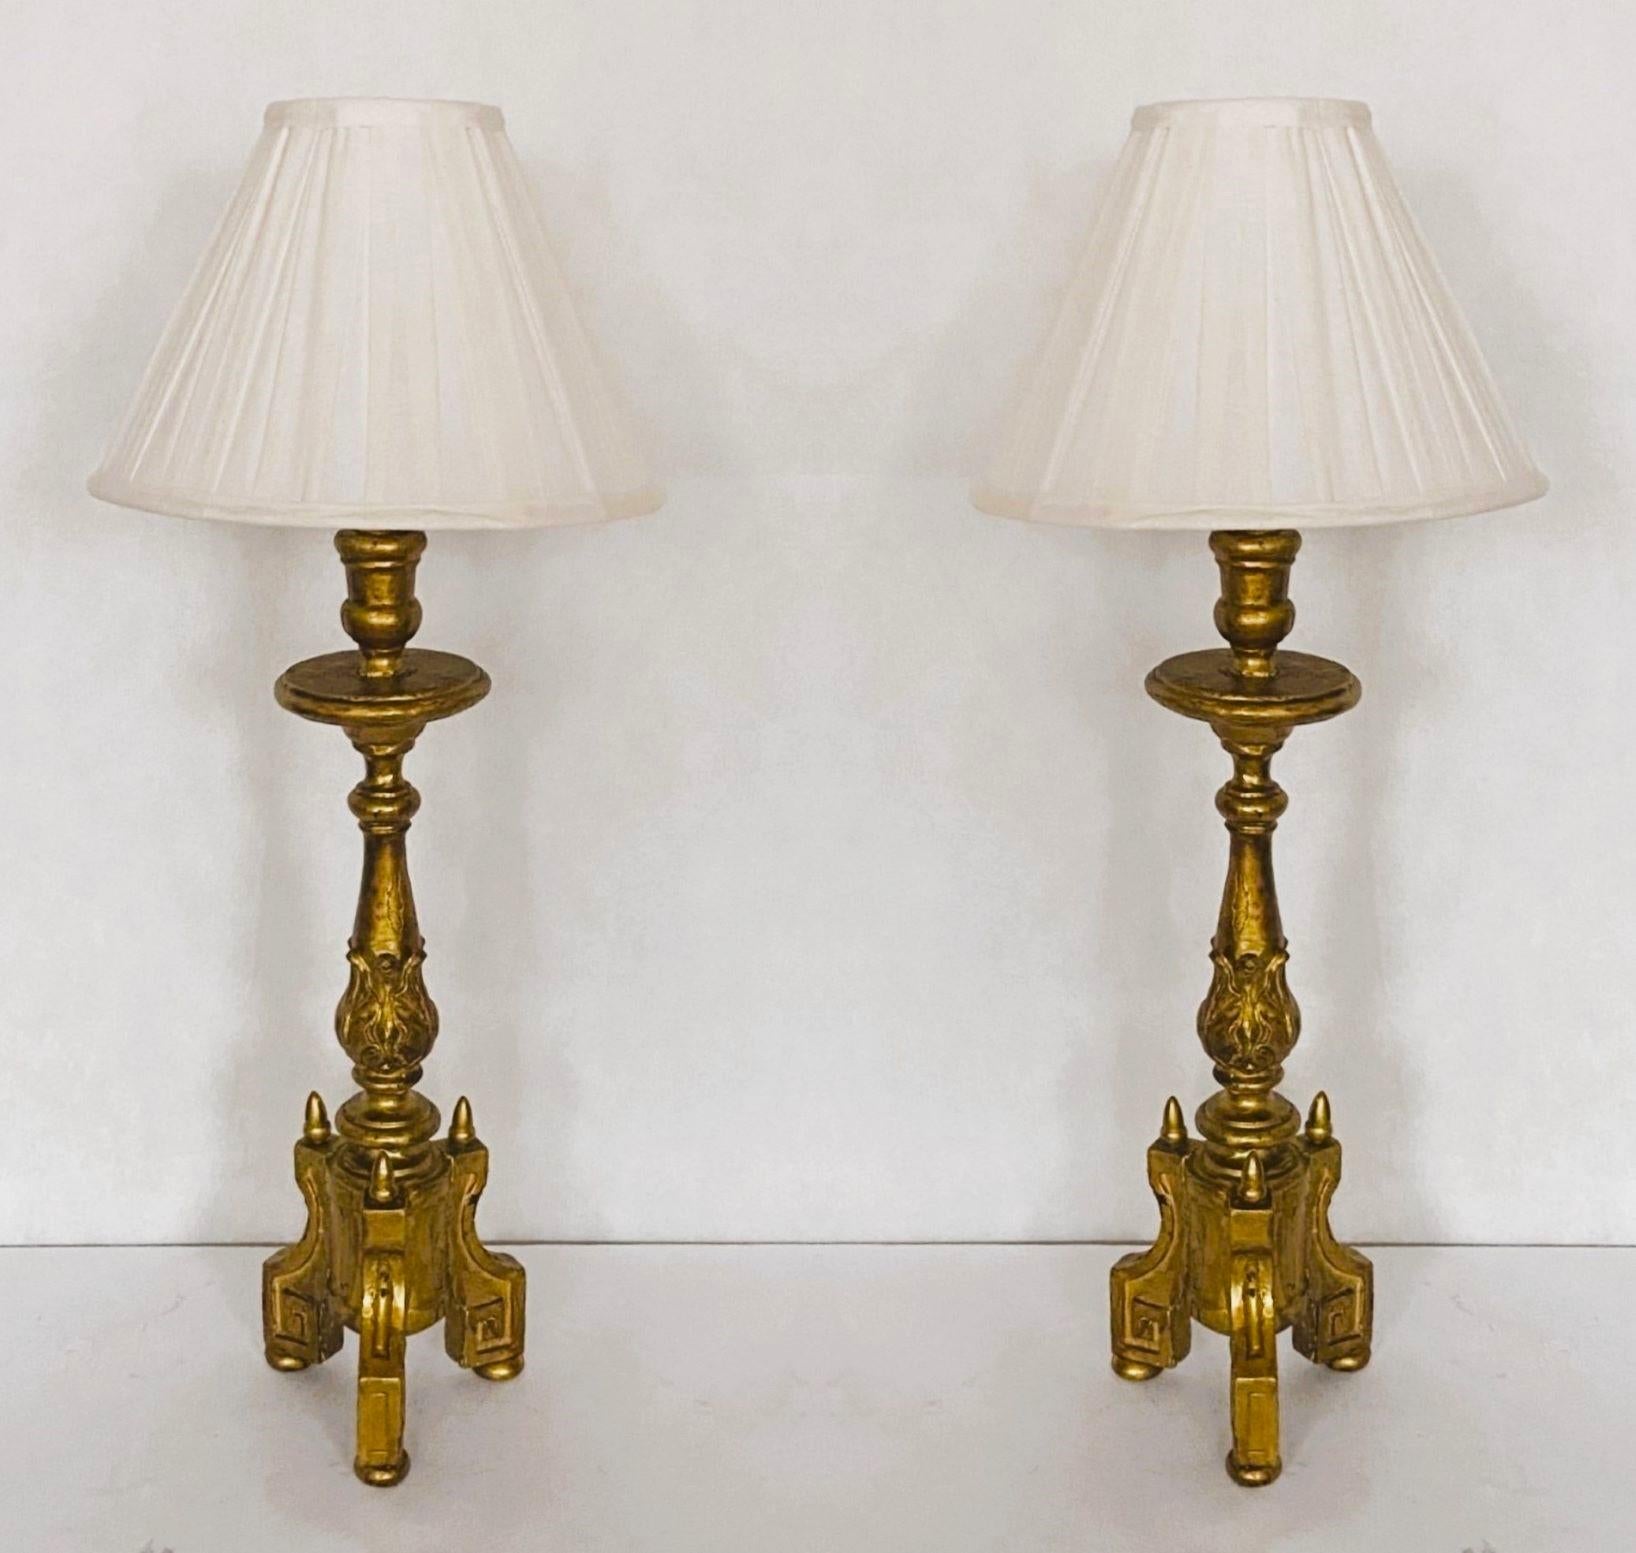 Baroque Pair of 18th Centurty Spanish Carved Gilt Wood Altar Candlesticks Table Lamps For Sale